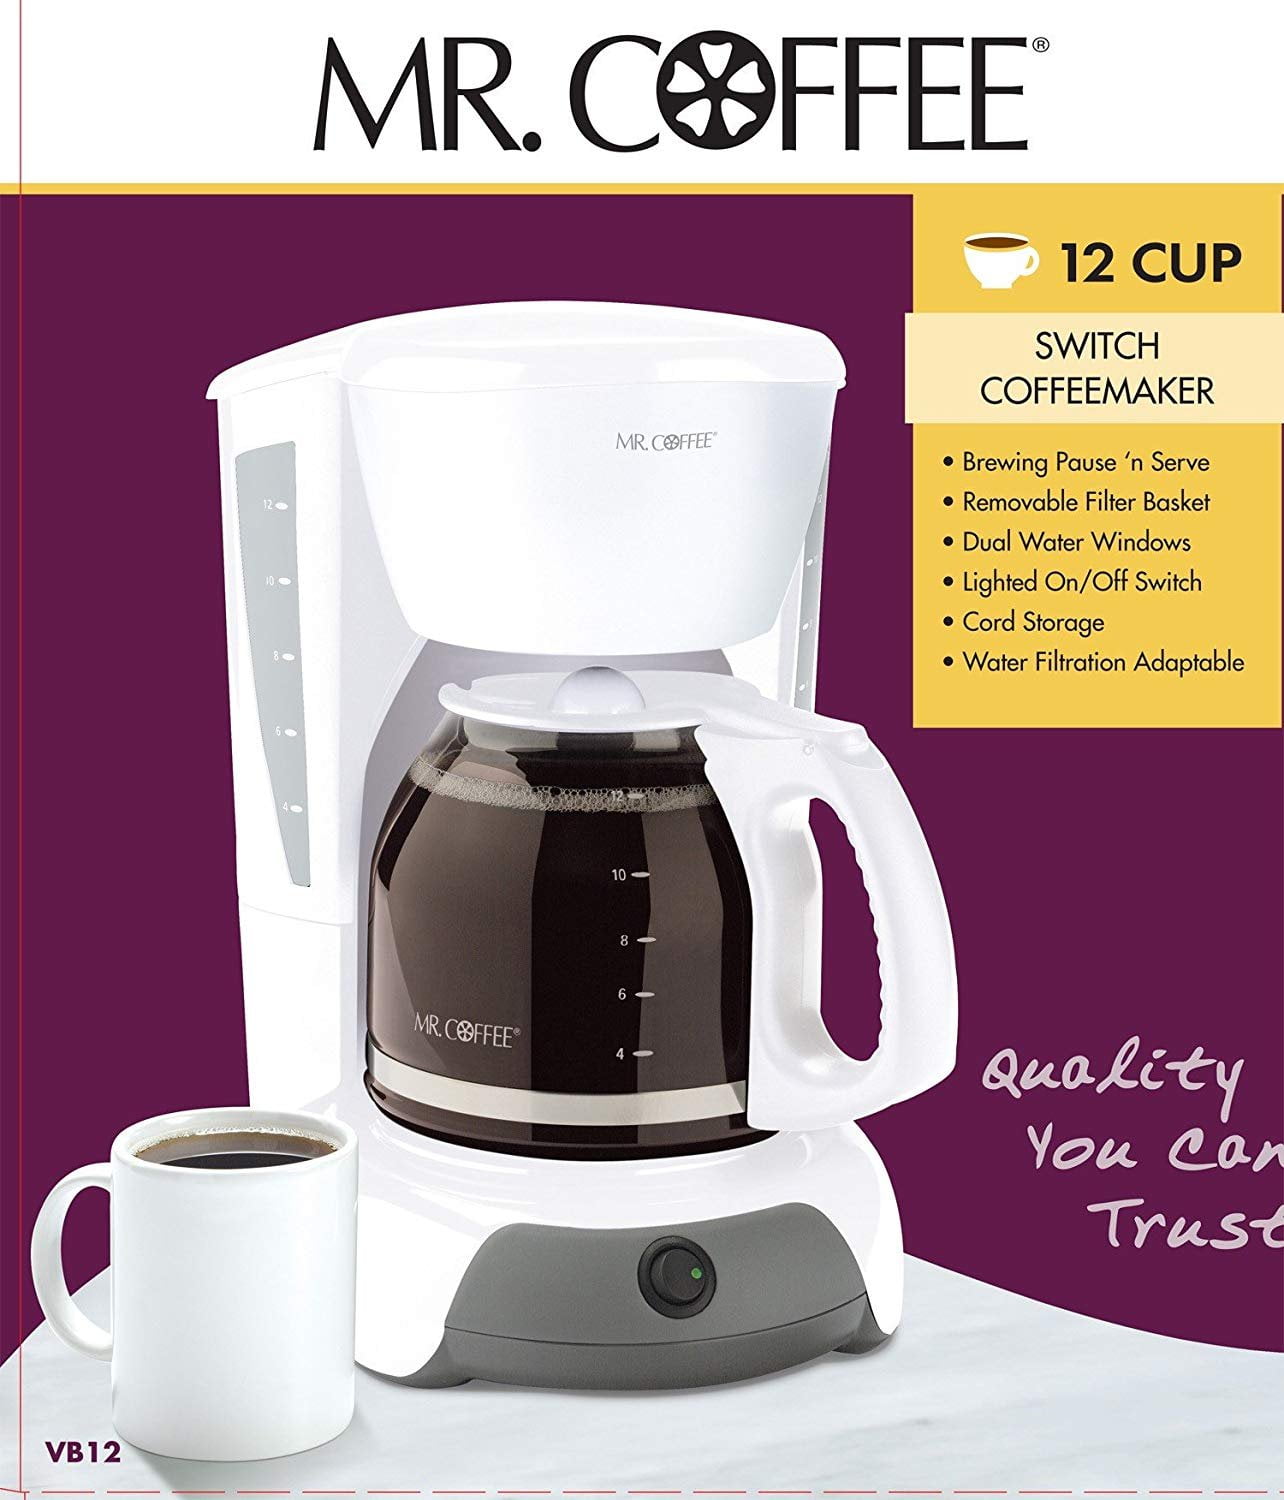 Mr. Coffee Simple Brew 12-Cup Programmable Coffee Maker, White – ShopBobbys